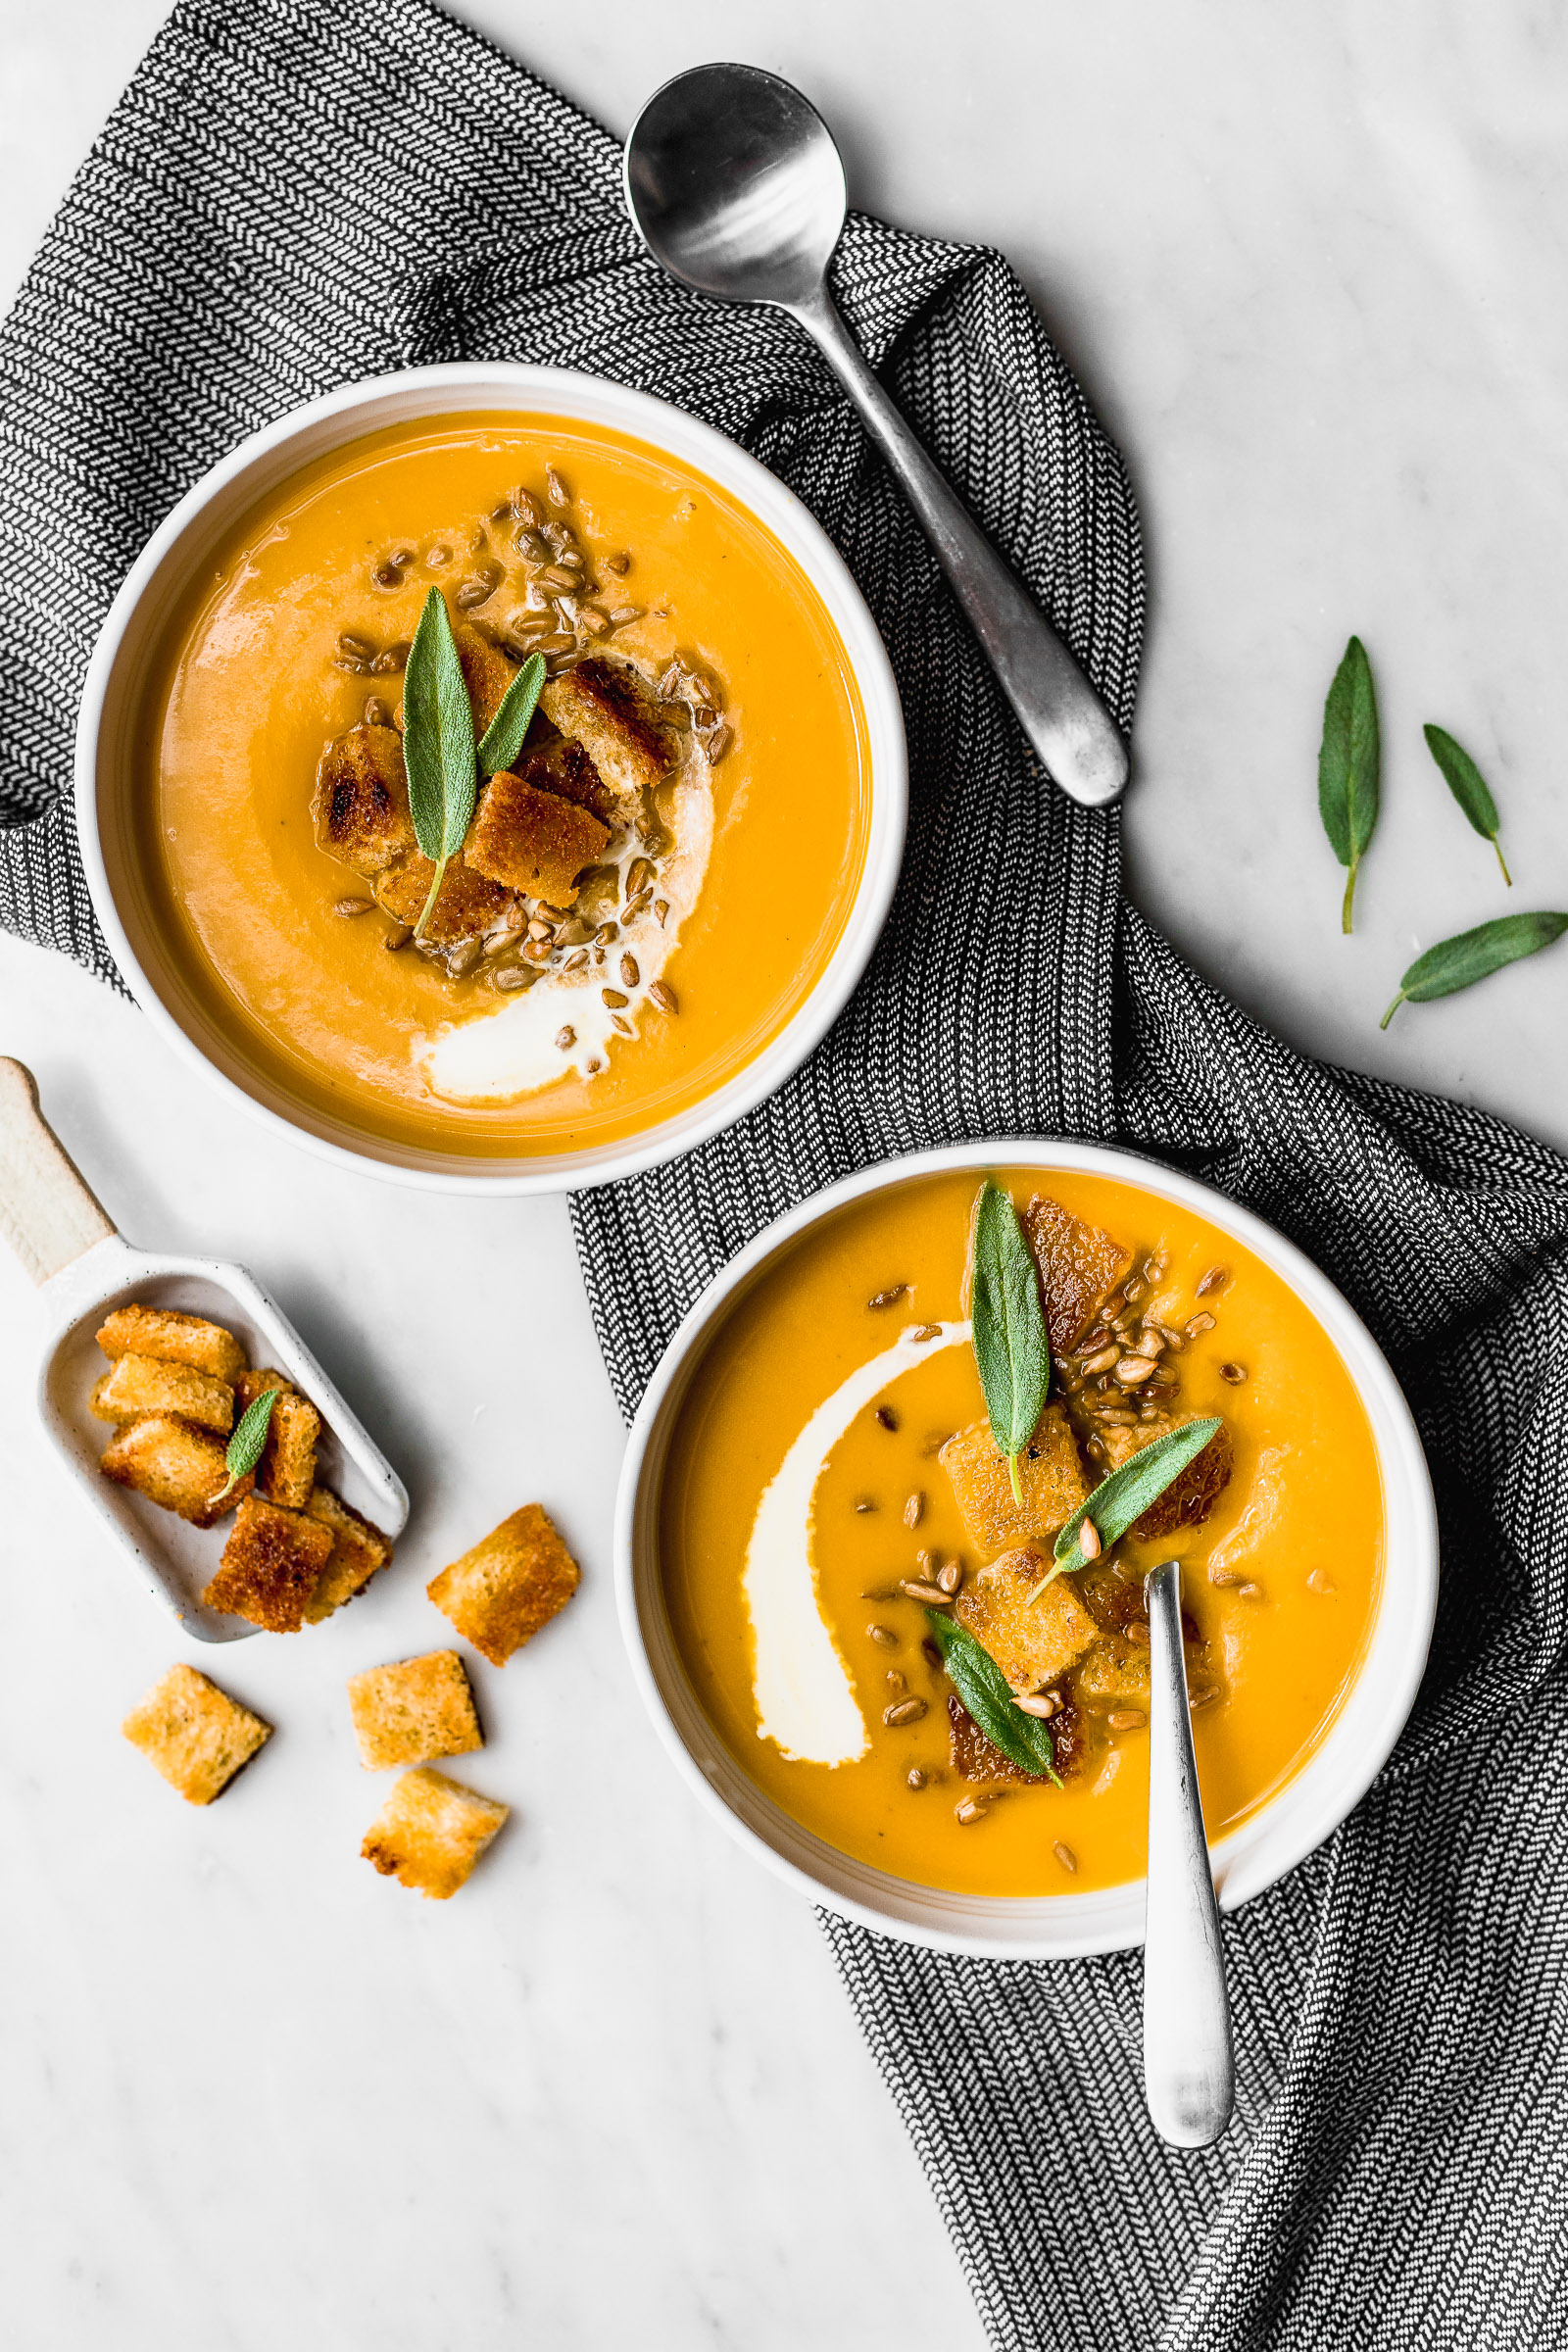 Two dishes of pumpkin soup with ginger, topped with croutons and sunflower seeds